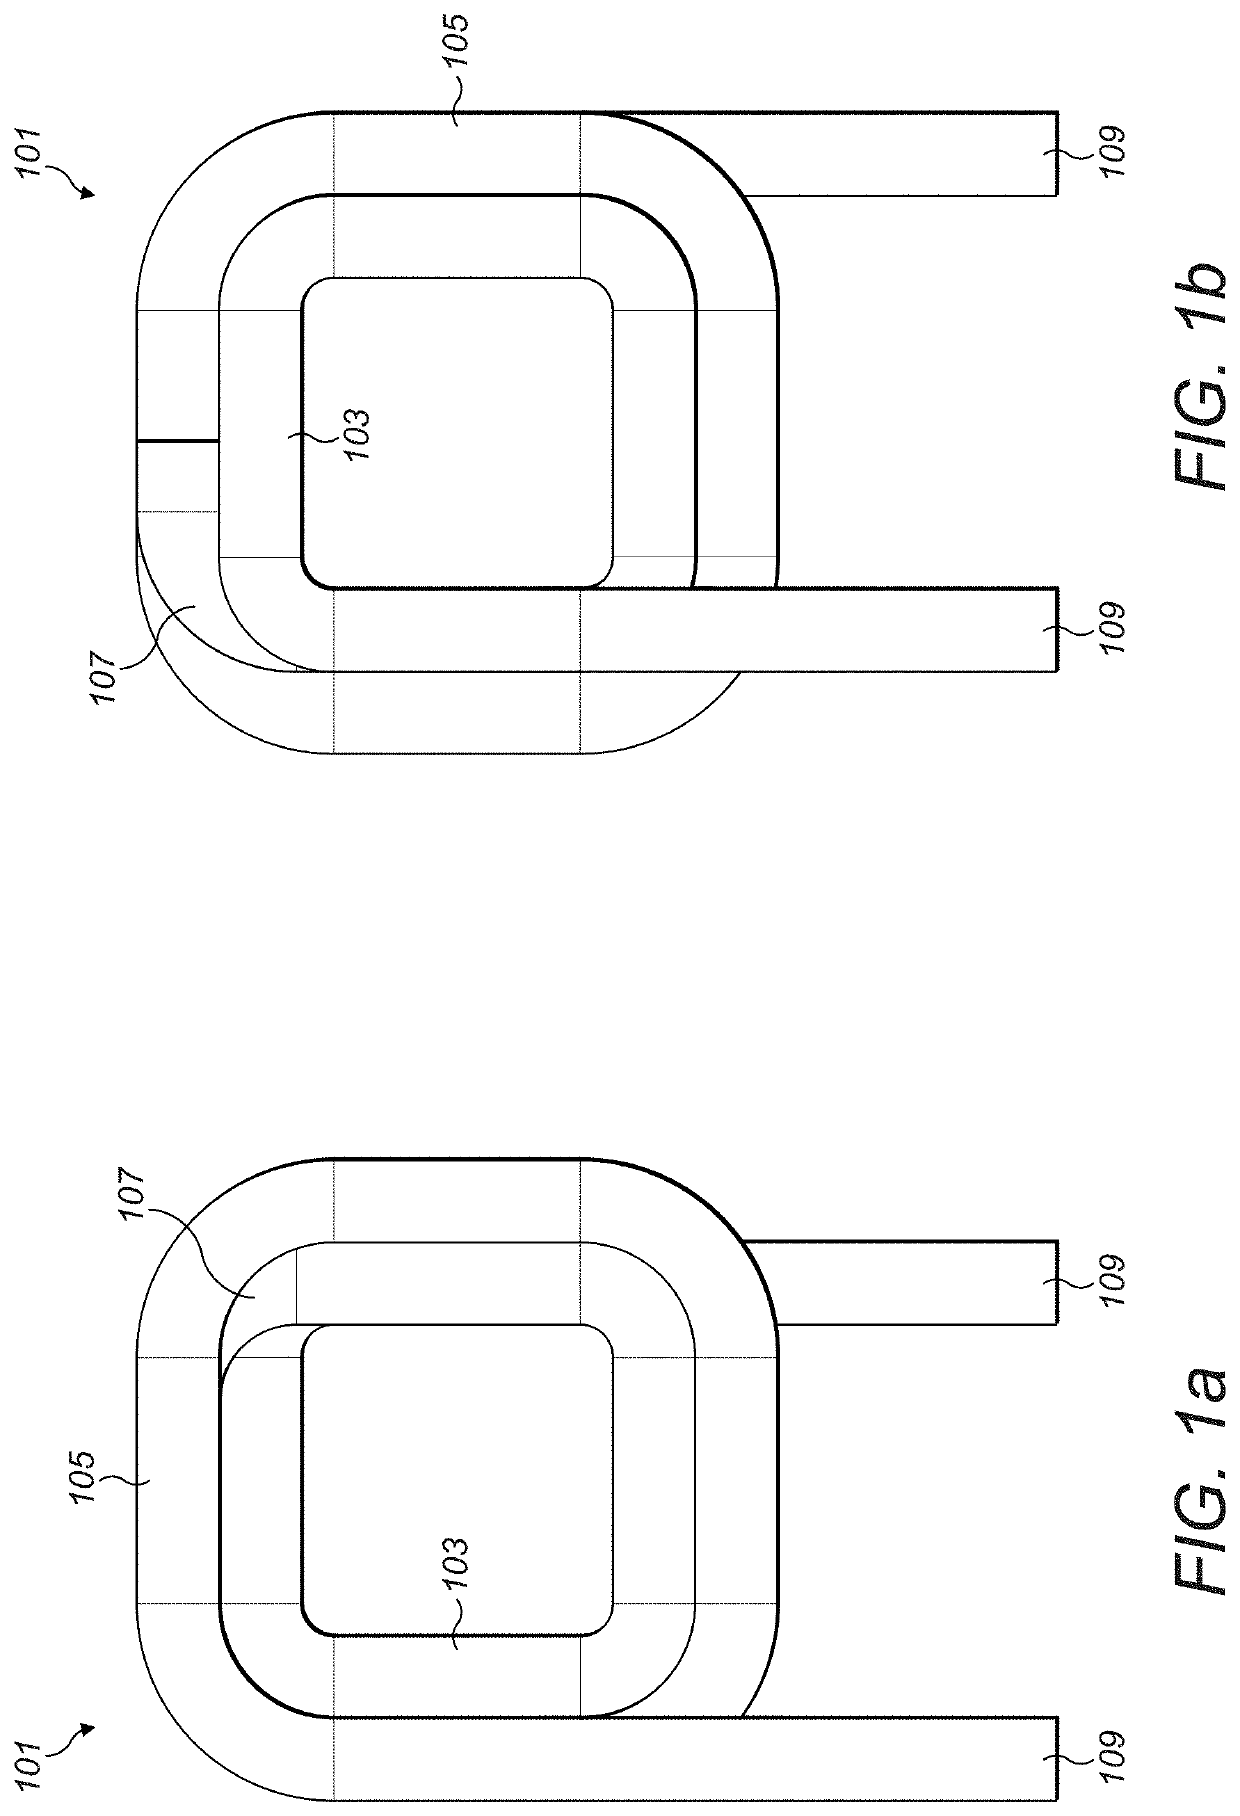 Winding arrangement for use in magnetic devices